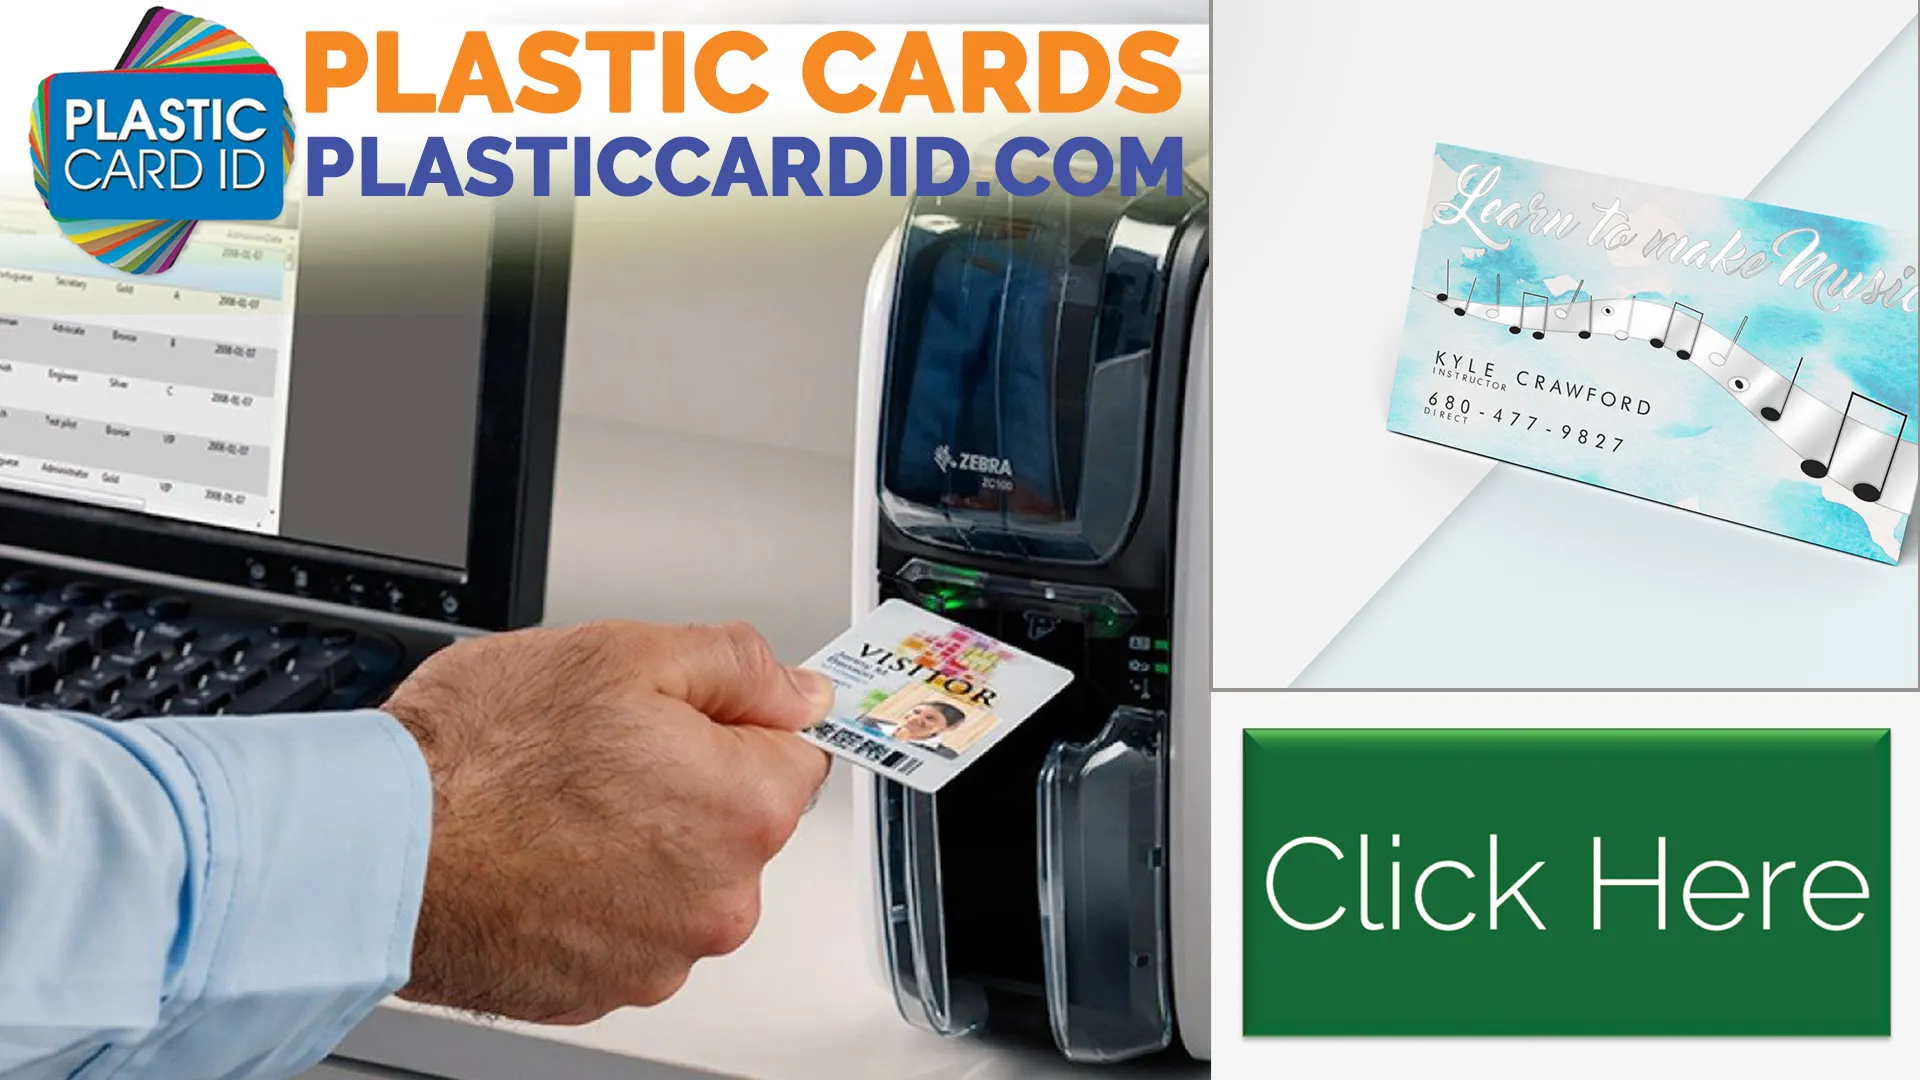 Welcome to Proactive Card Care with Plastic Card ID




